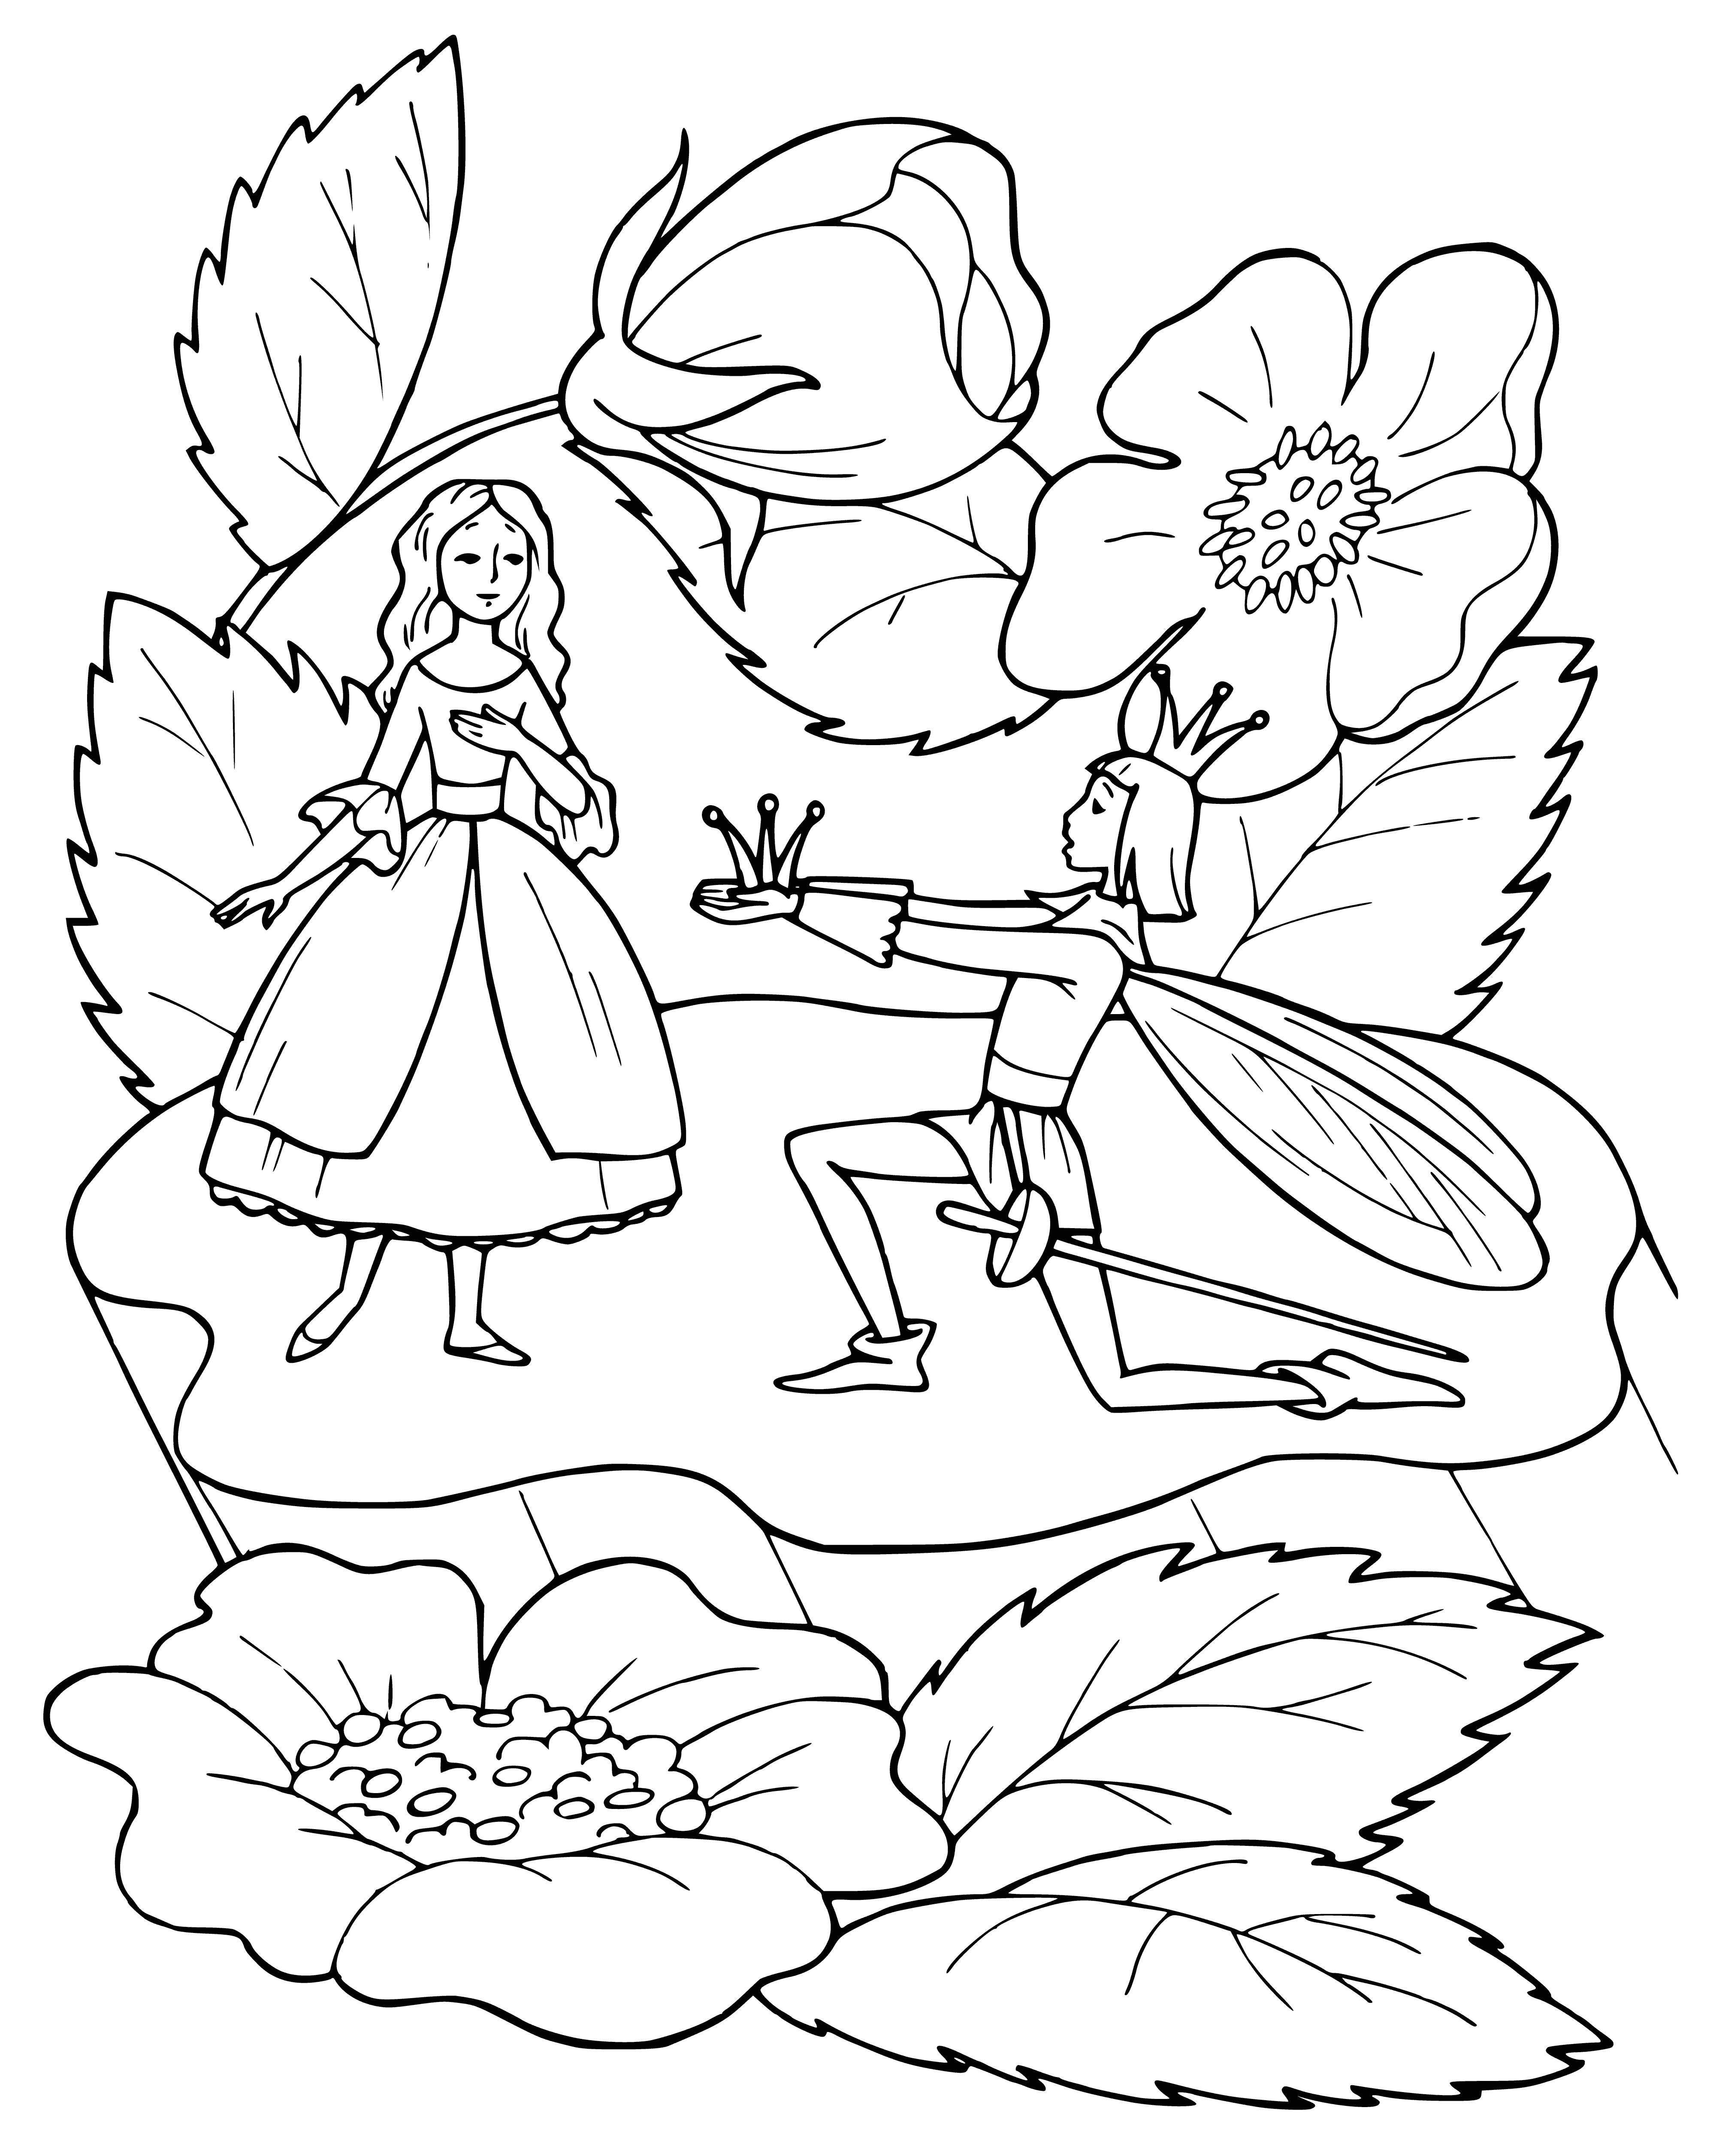 coloring page: A prince kneels before a small girl holding a flower. He has a sword and looks like he's about to say something.